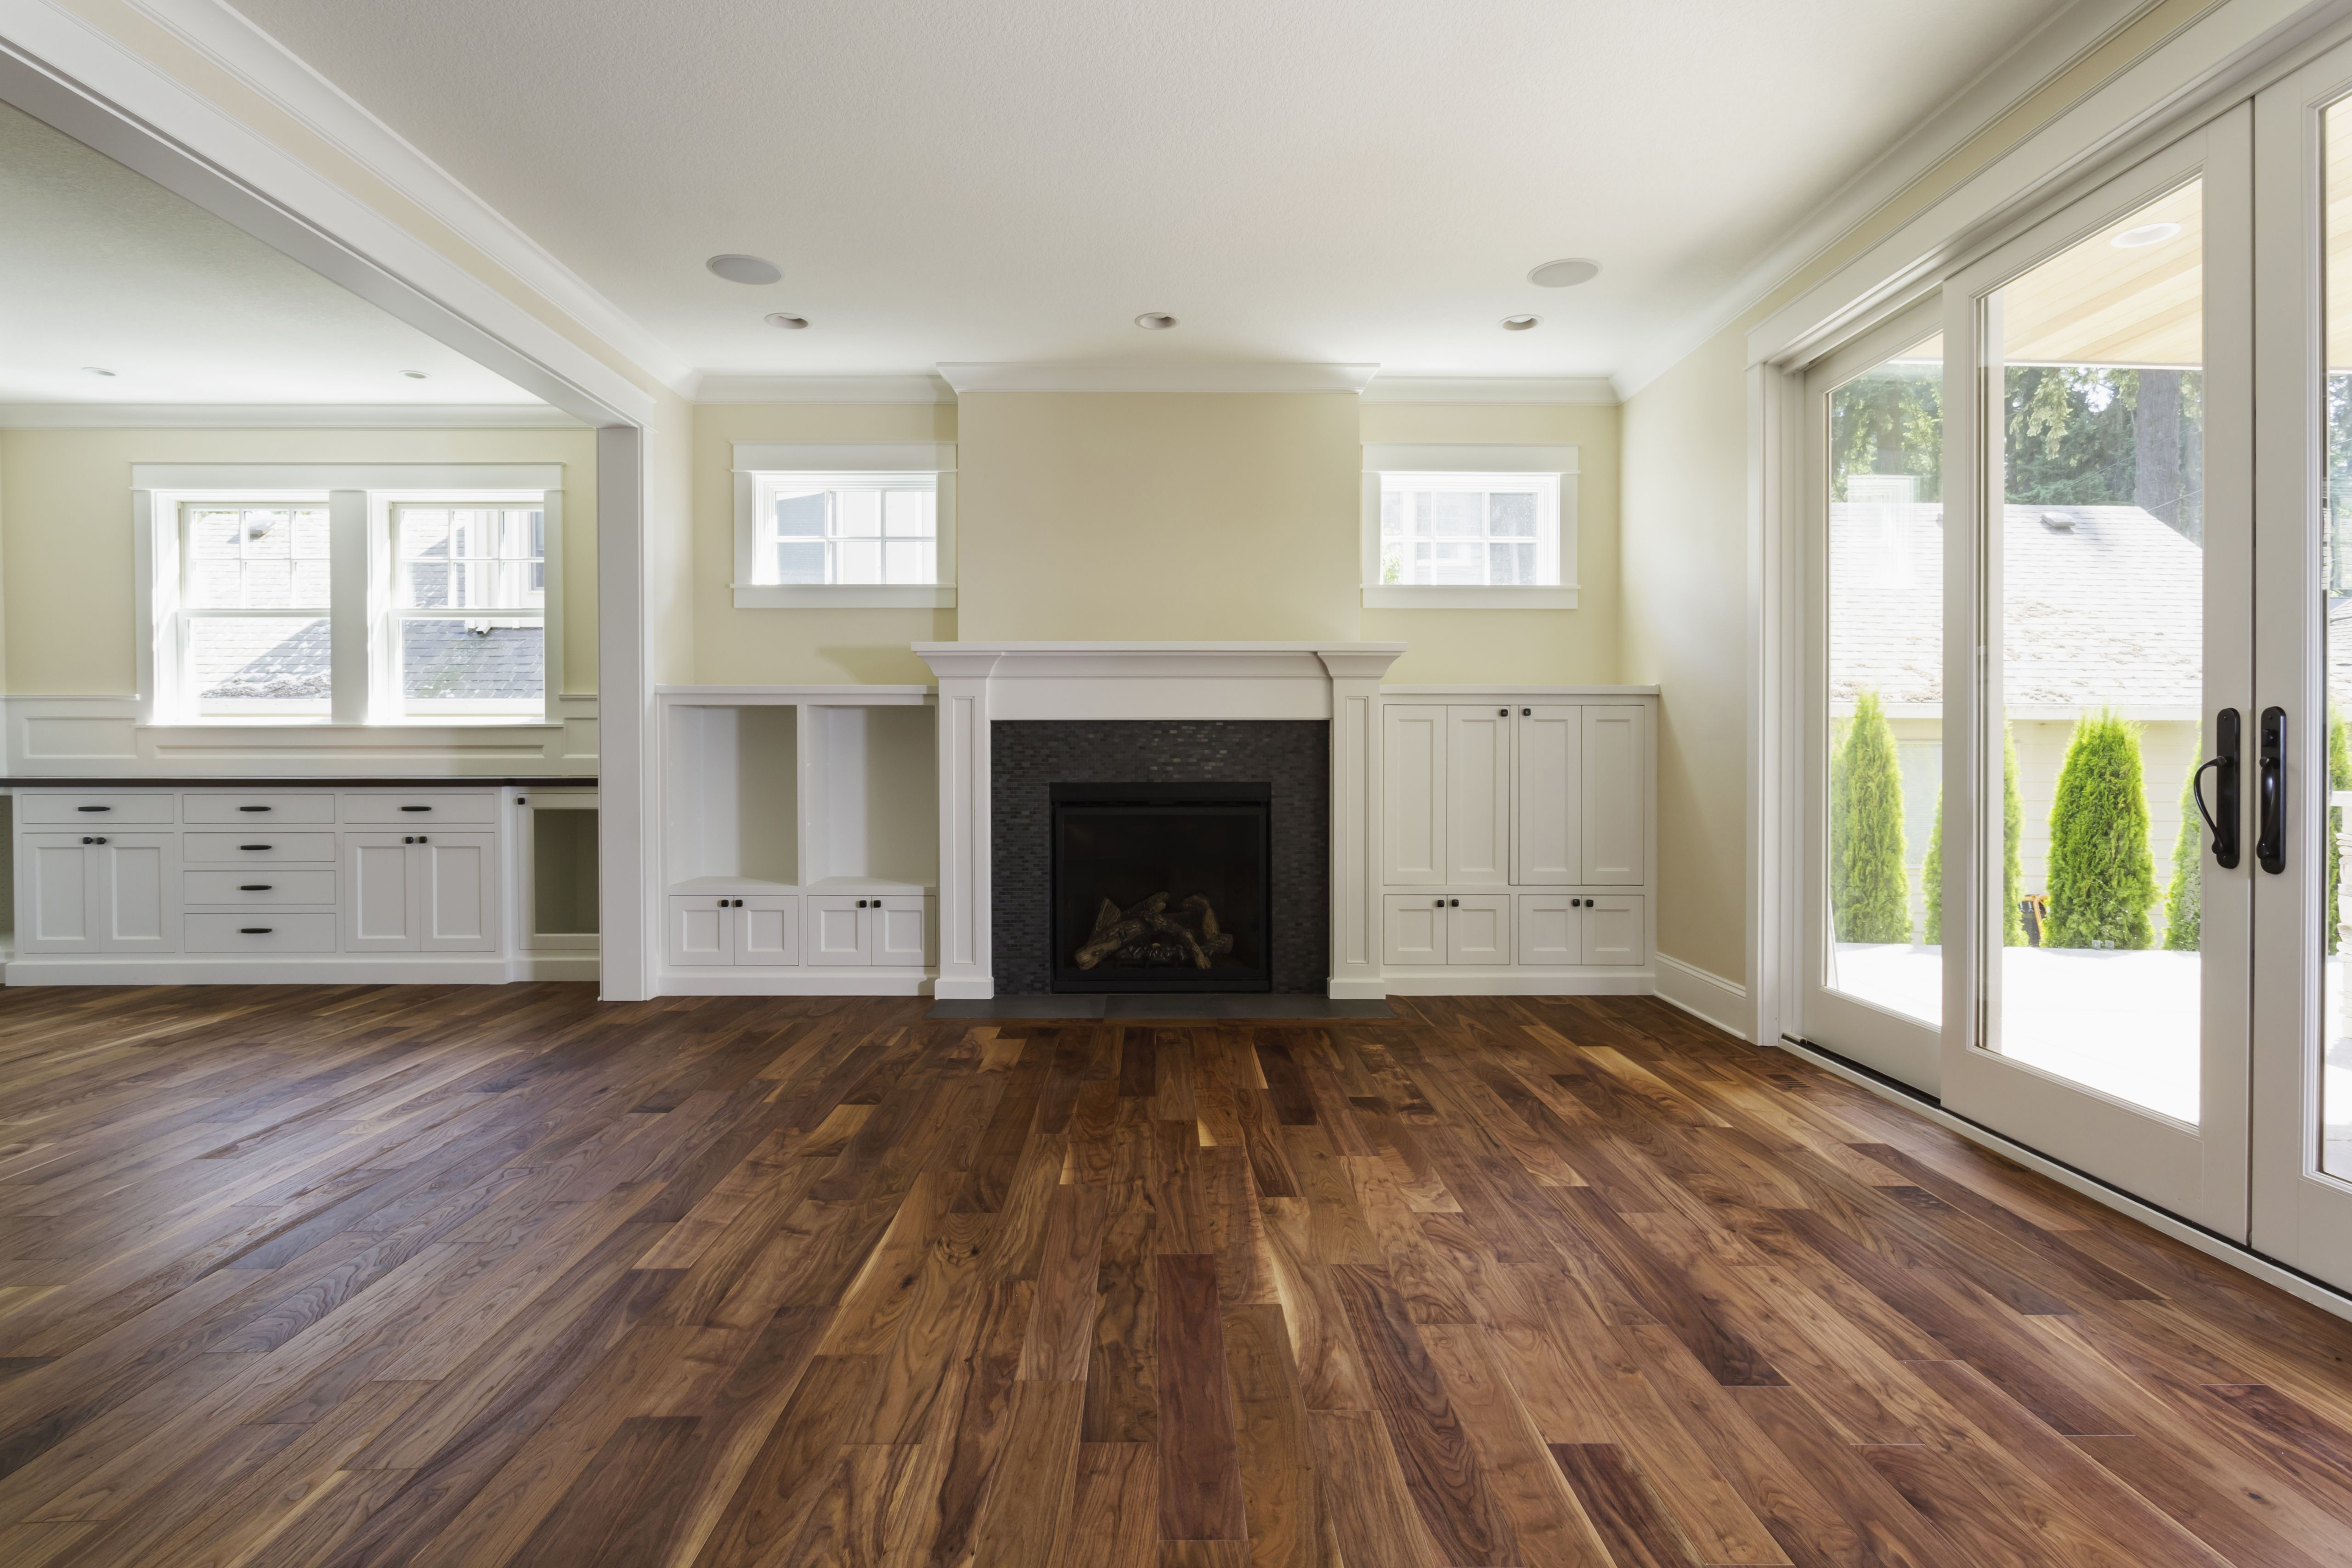 20 Famous 3 1 4 Prefinished Hardwood Flooring 2024 free download 3 1 4 prefinished hardwood flooring of the pros and cons of prefinished hardwood flooring with regard to fireplace and built in shelves in living room 482143011 57bef8e33df78cc16e035397